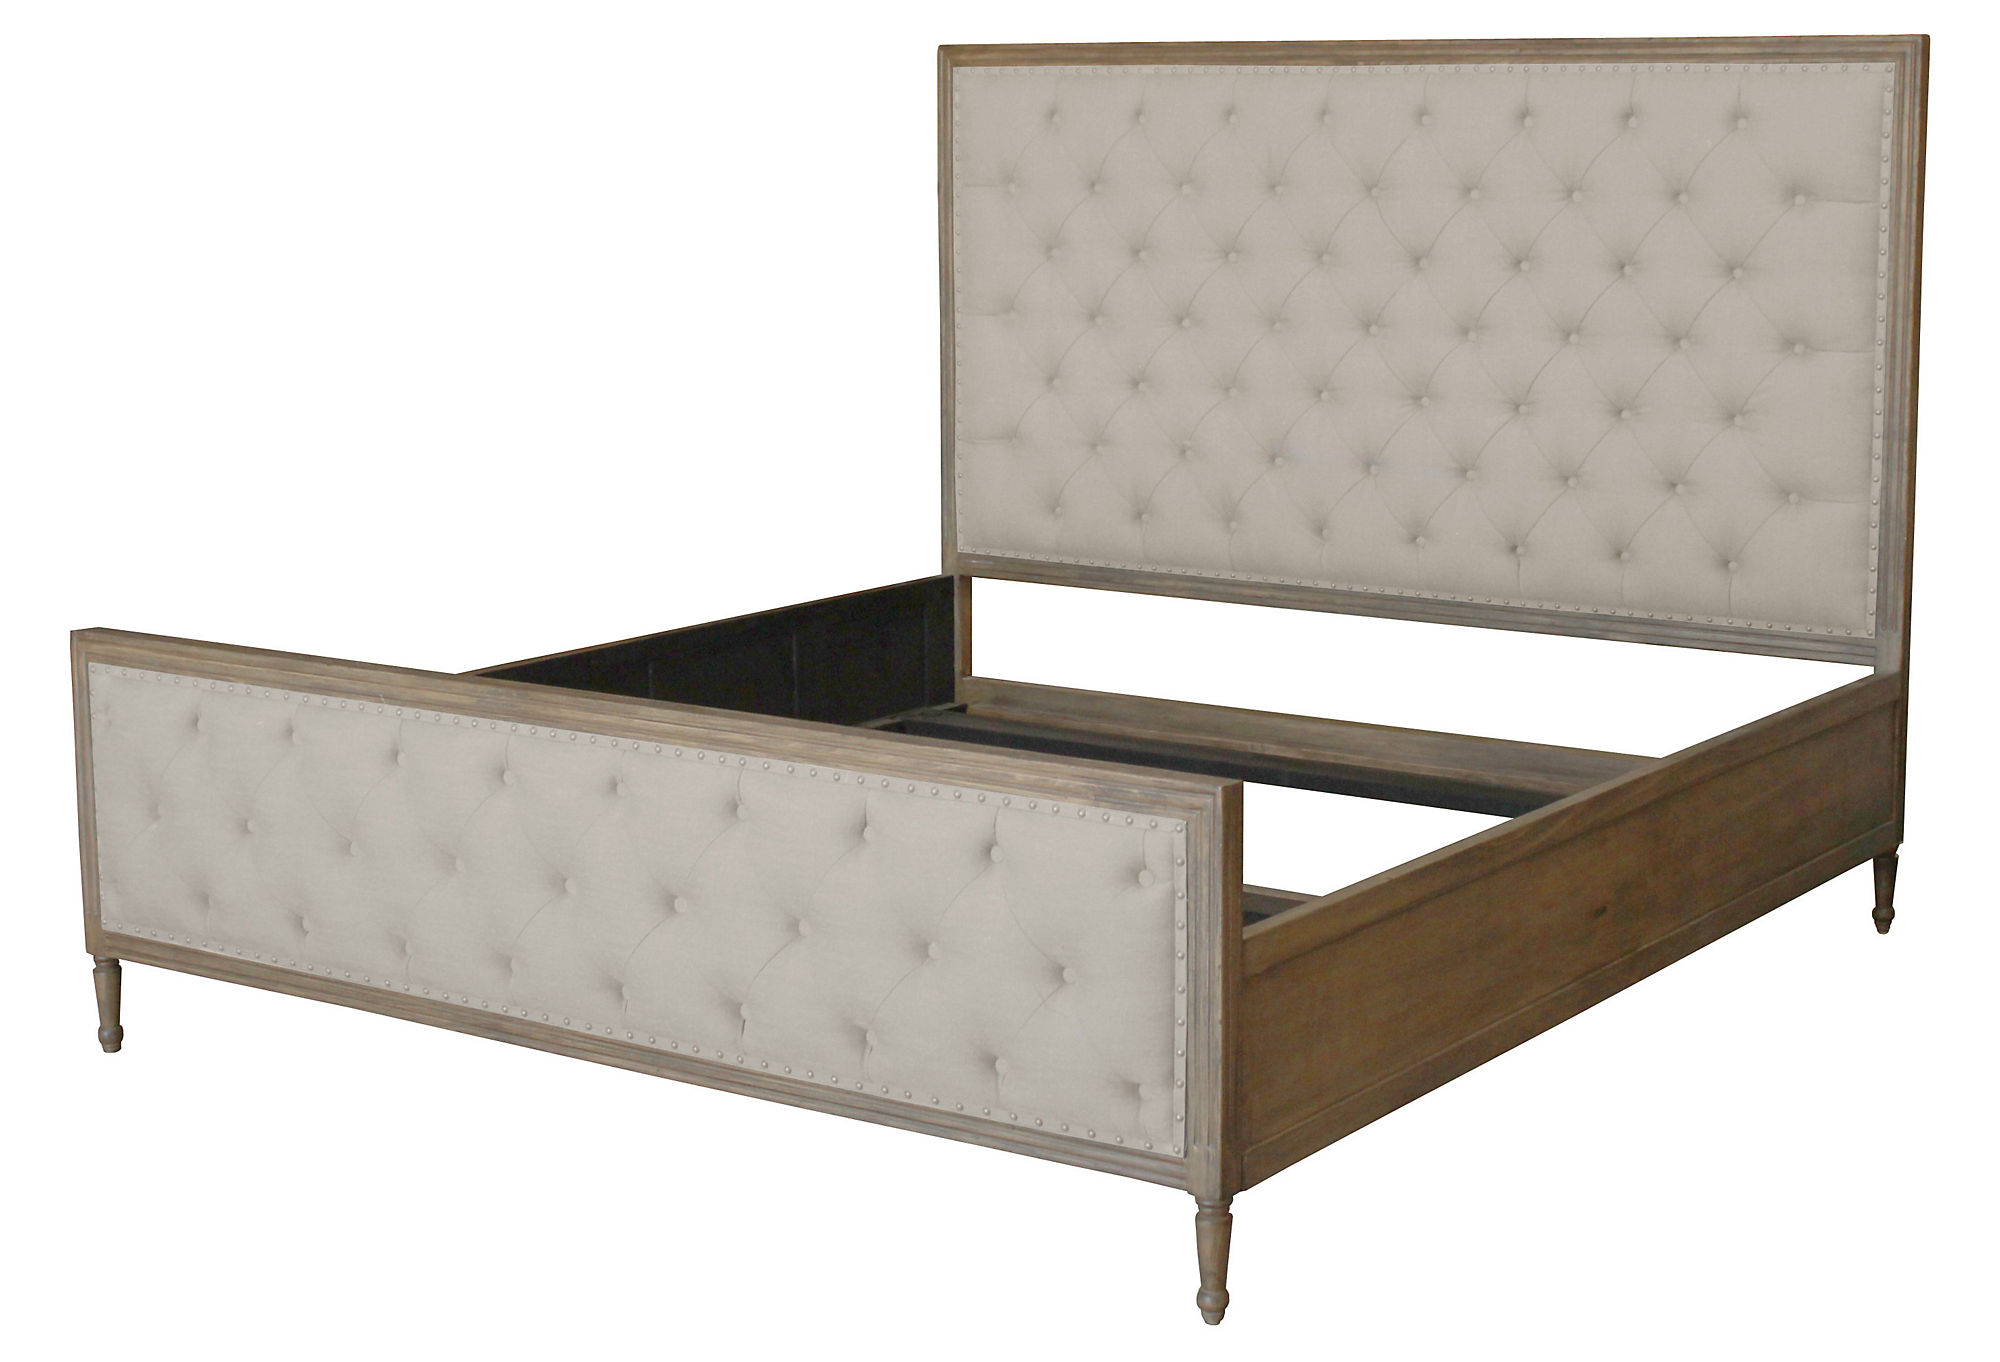 tufted bed headboard beds headboards king queen double size furniture prices sizes single